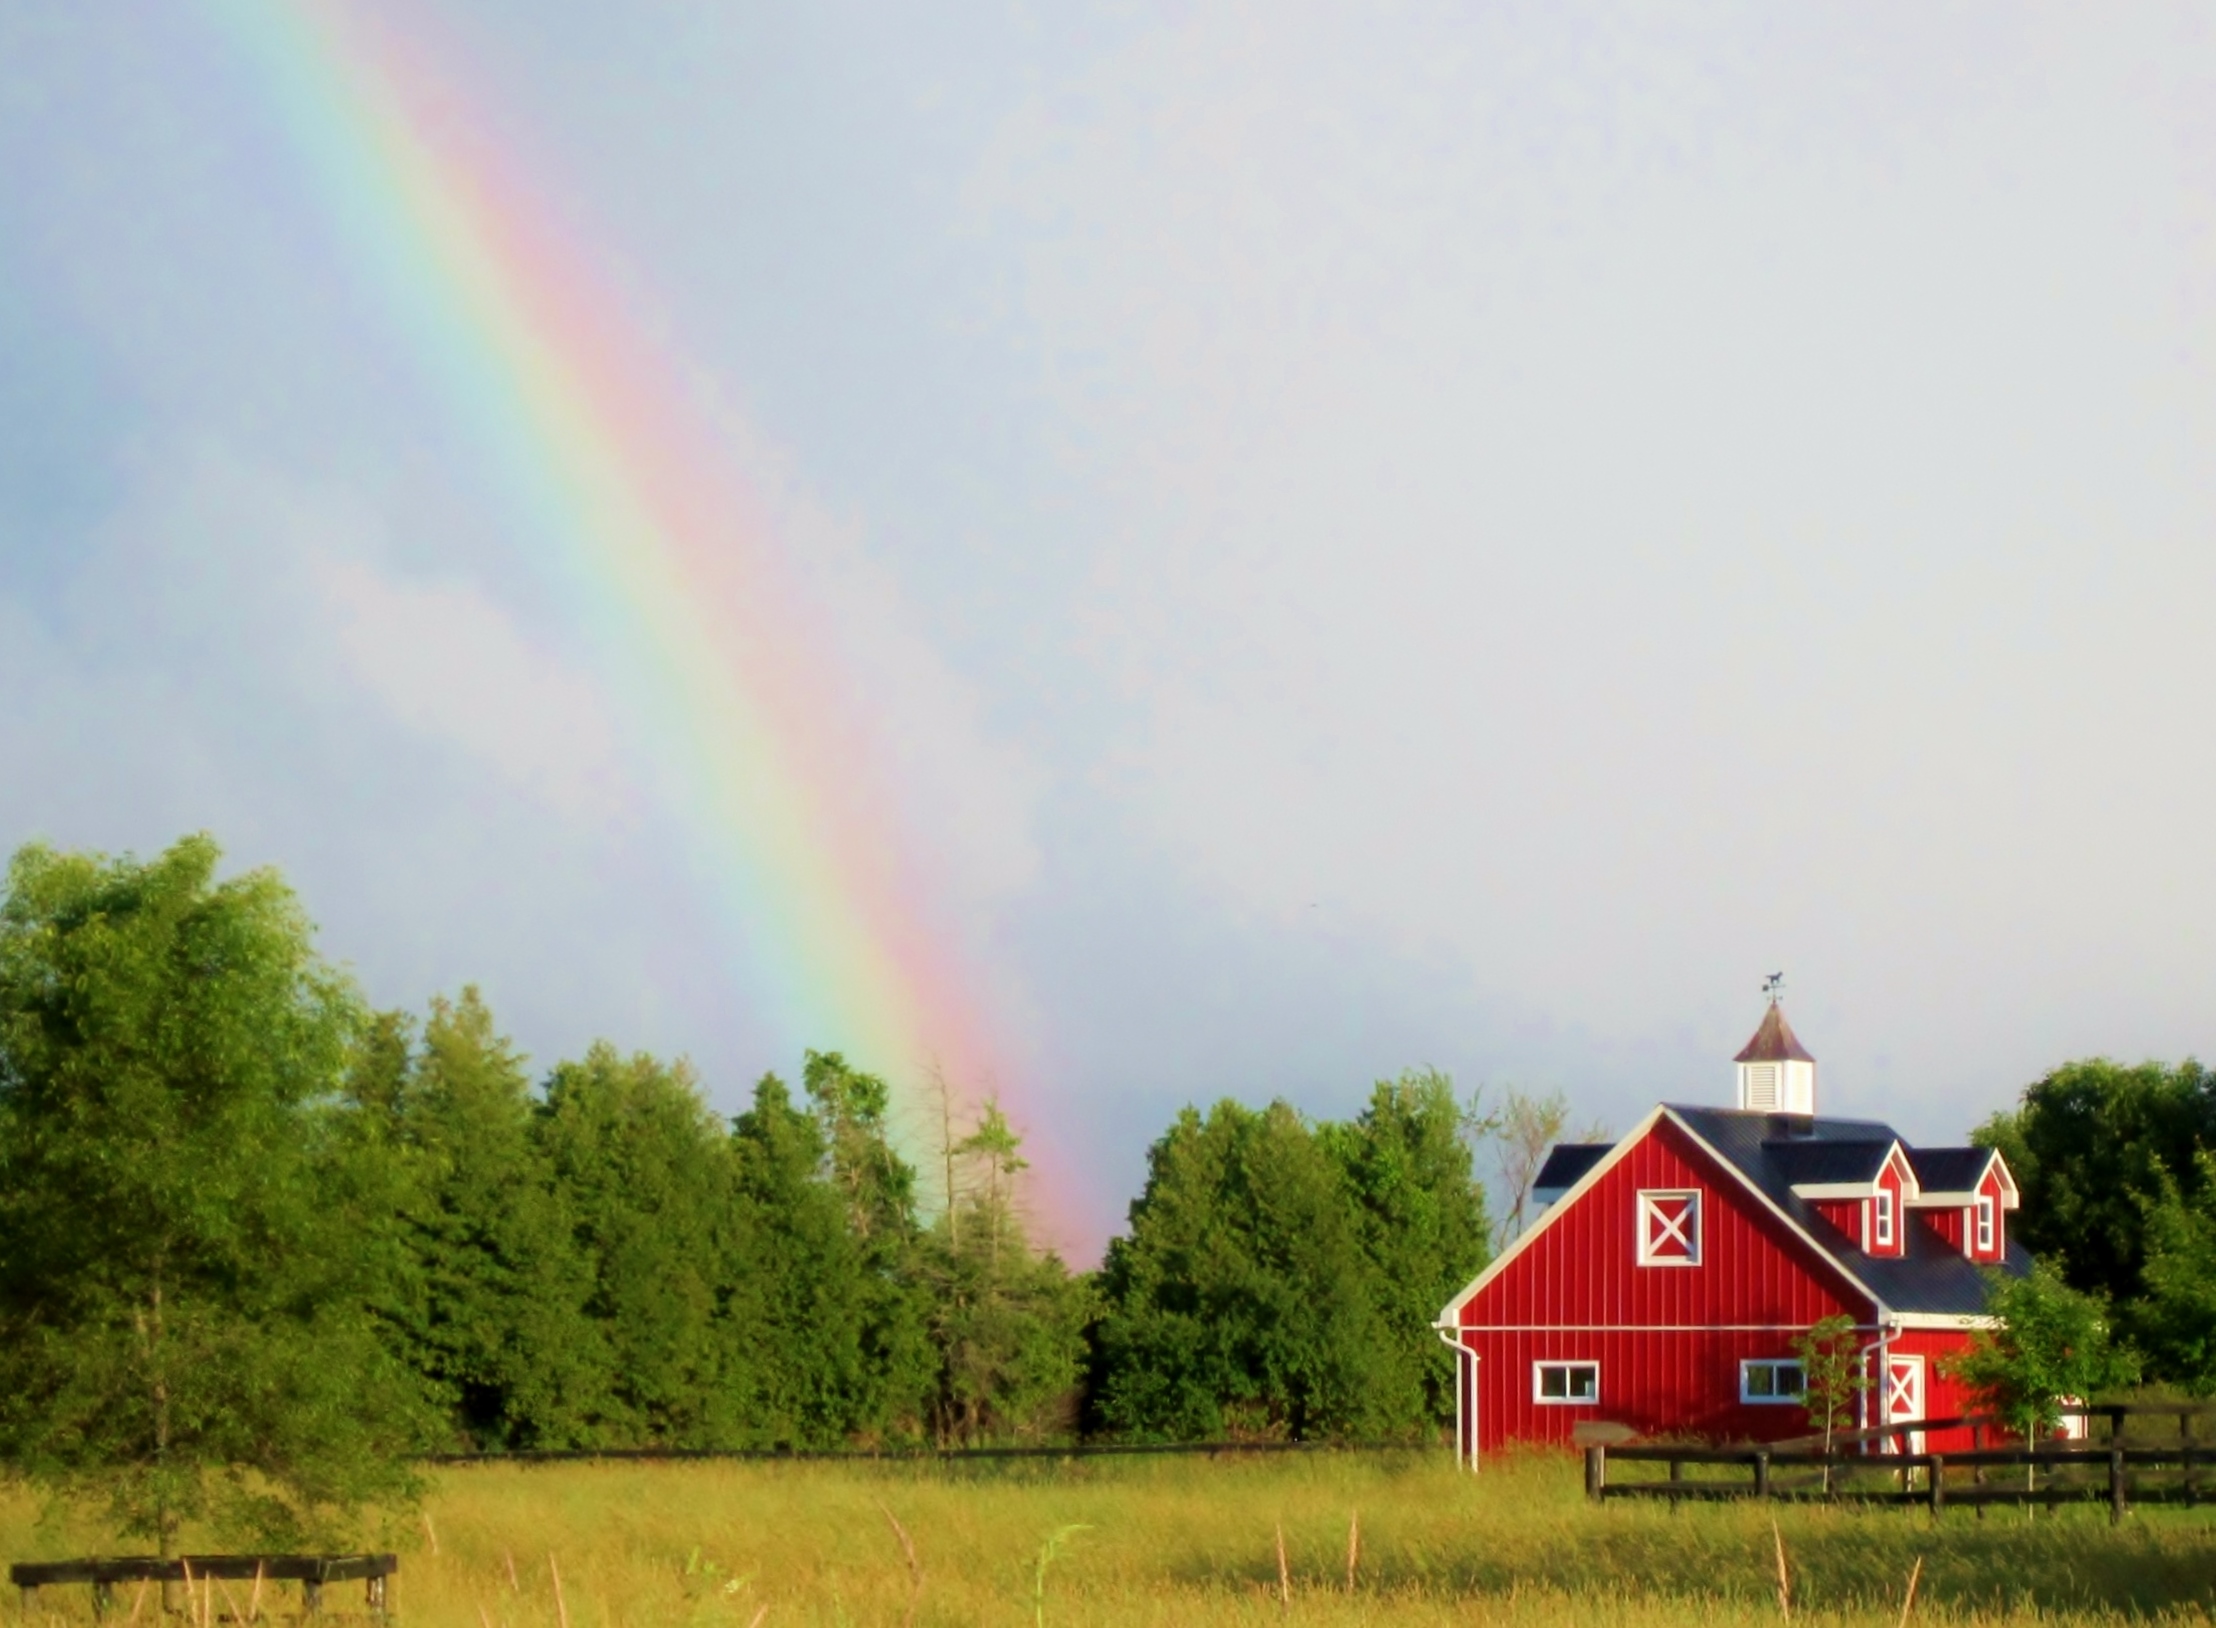 barn with rainbow in sky behind it